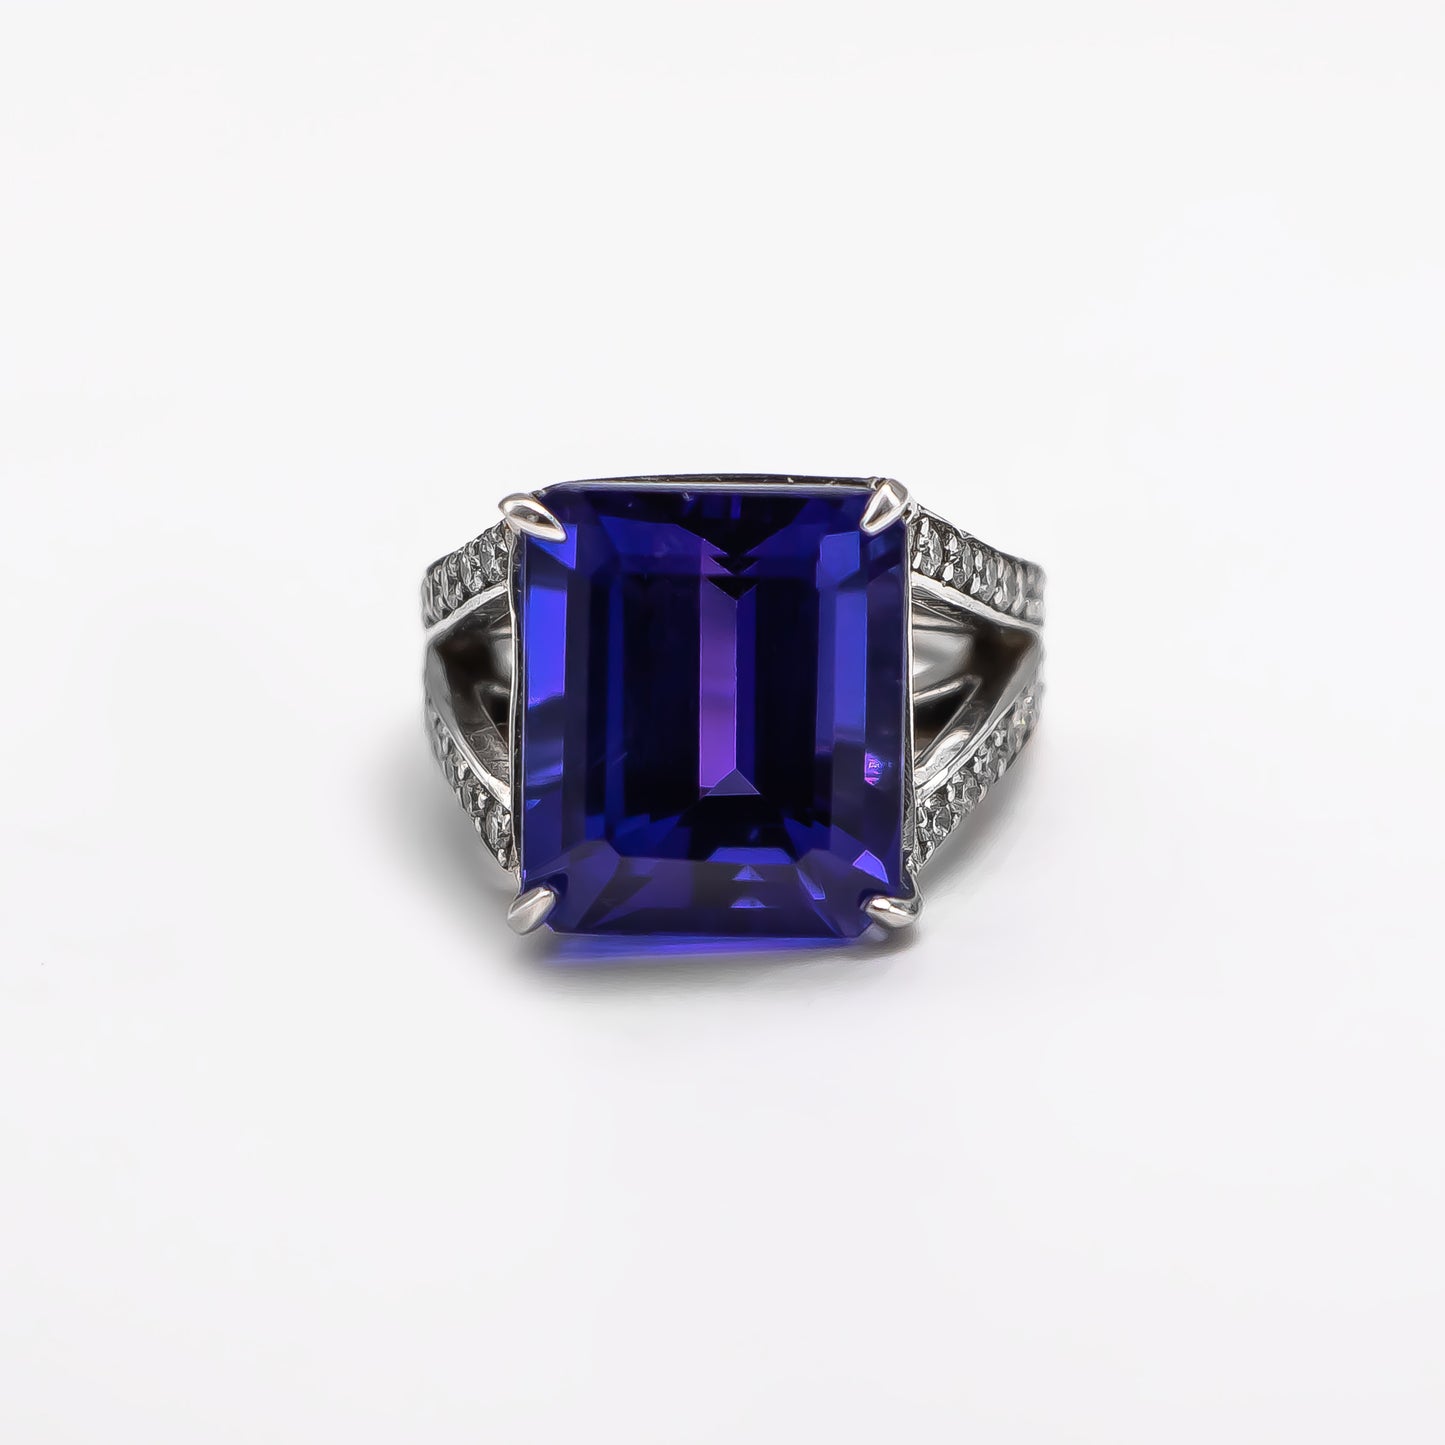 Very Fine 17.67 Carat Tanzanite Ring Encrusted With 1.46 Carats Diamonds